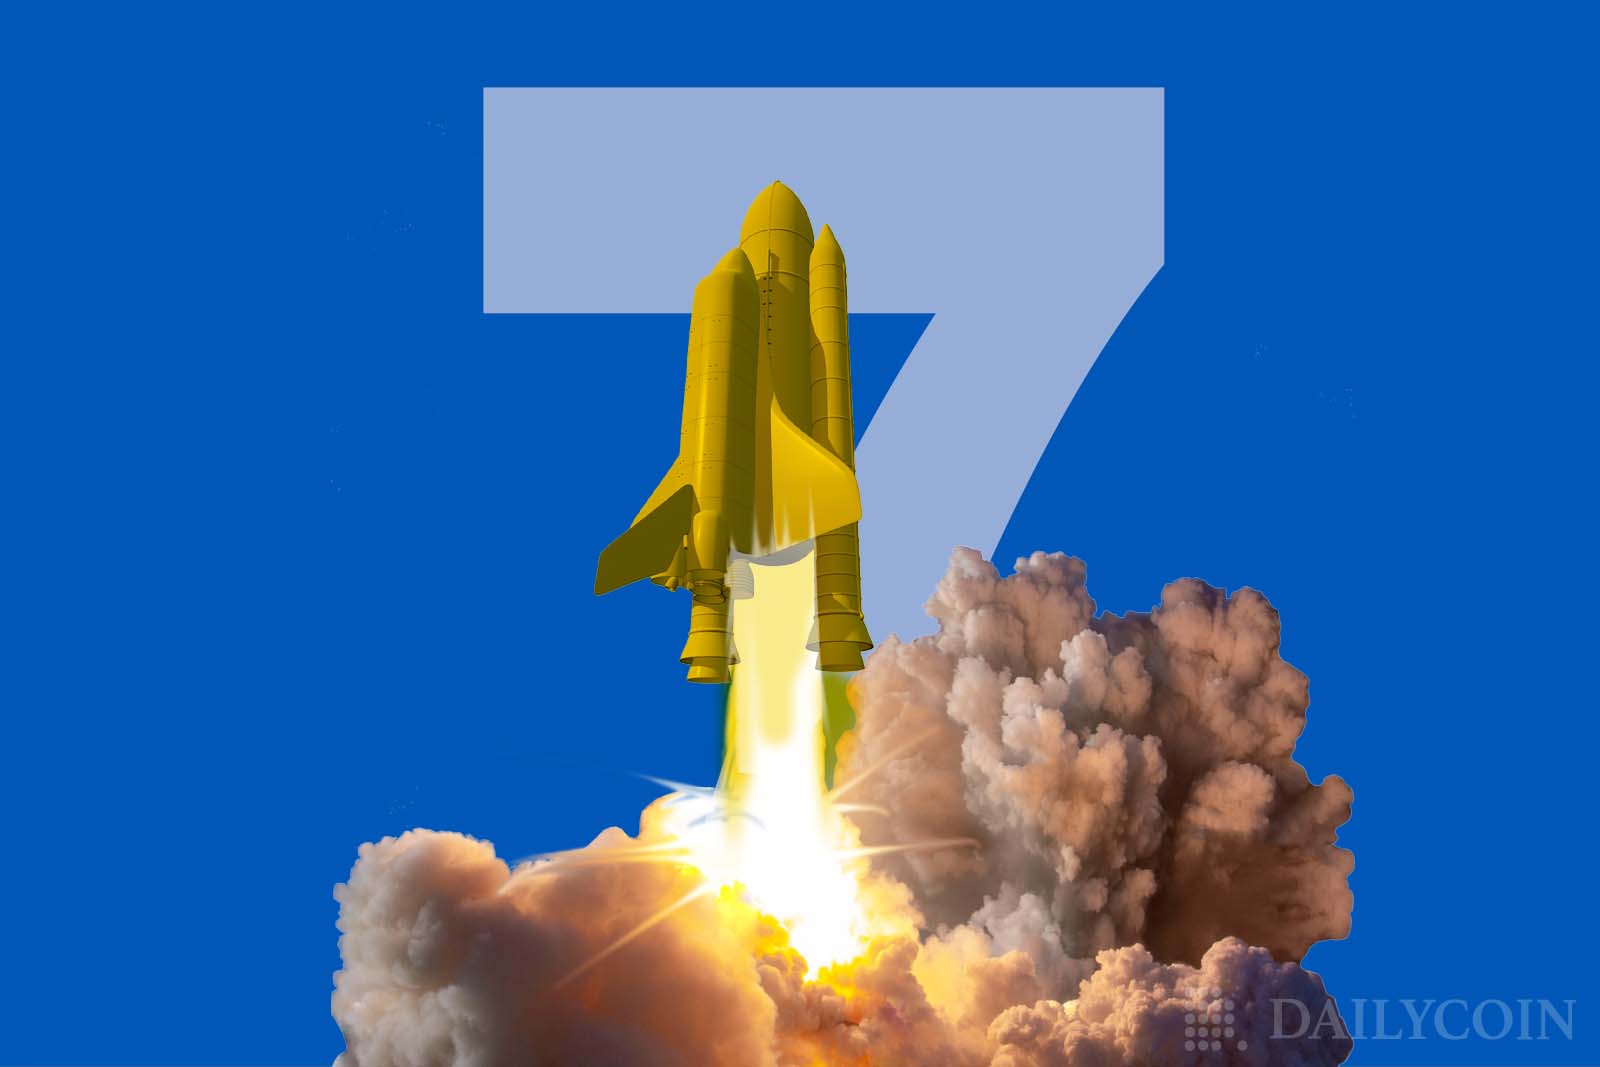 Security Tokens Issuance - Top 7 Alternative STO Launchpads to Consider in 2022